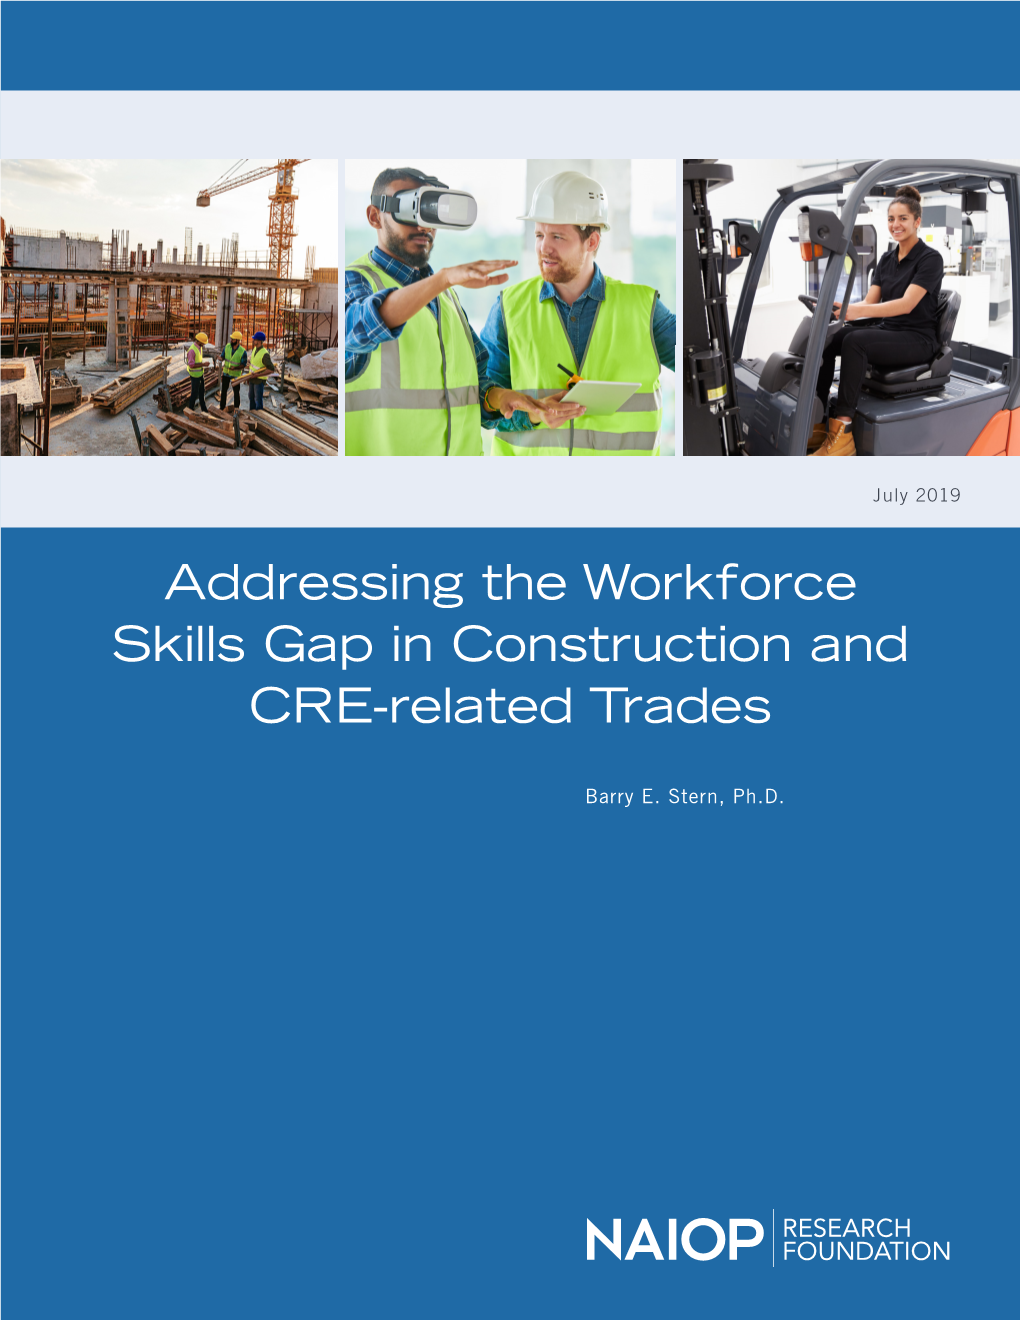 Addressing the Workforce Skills Gap in Construction and CRE-Related Trades